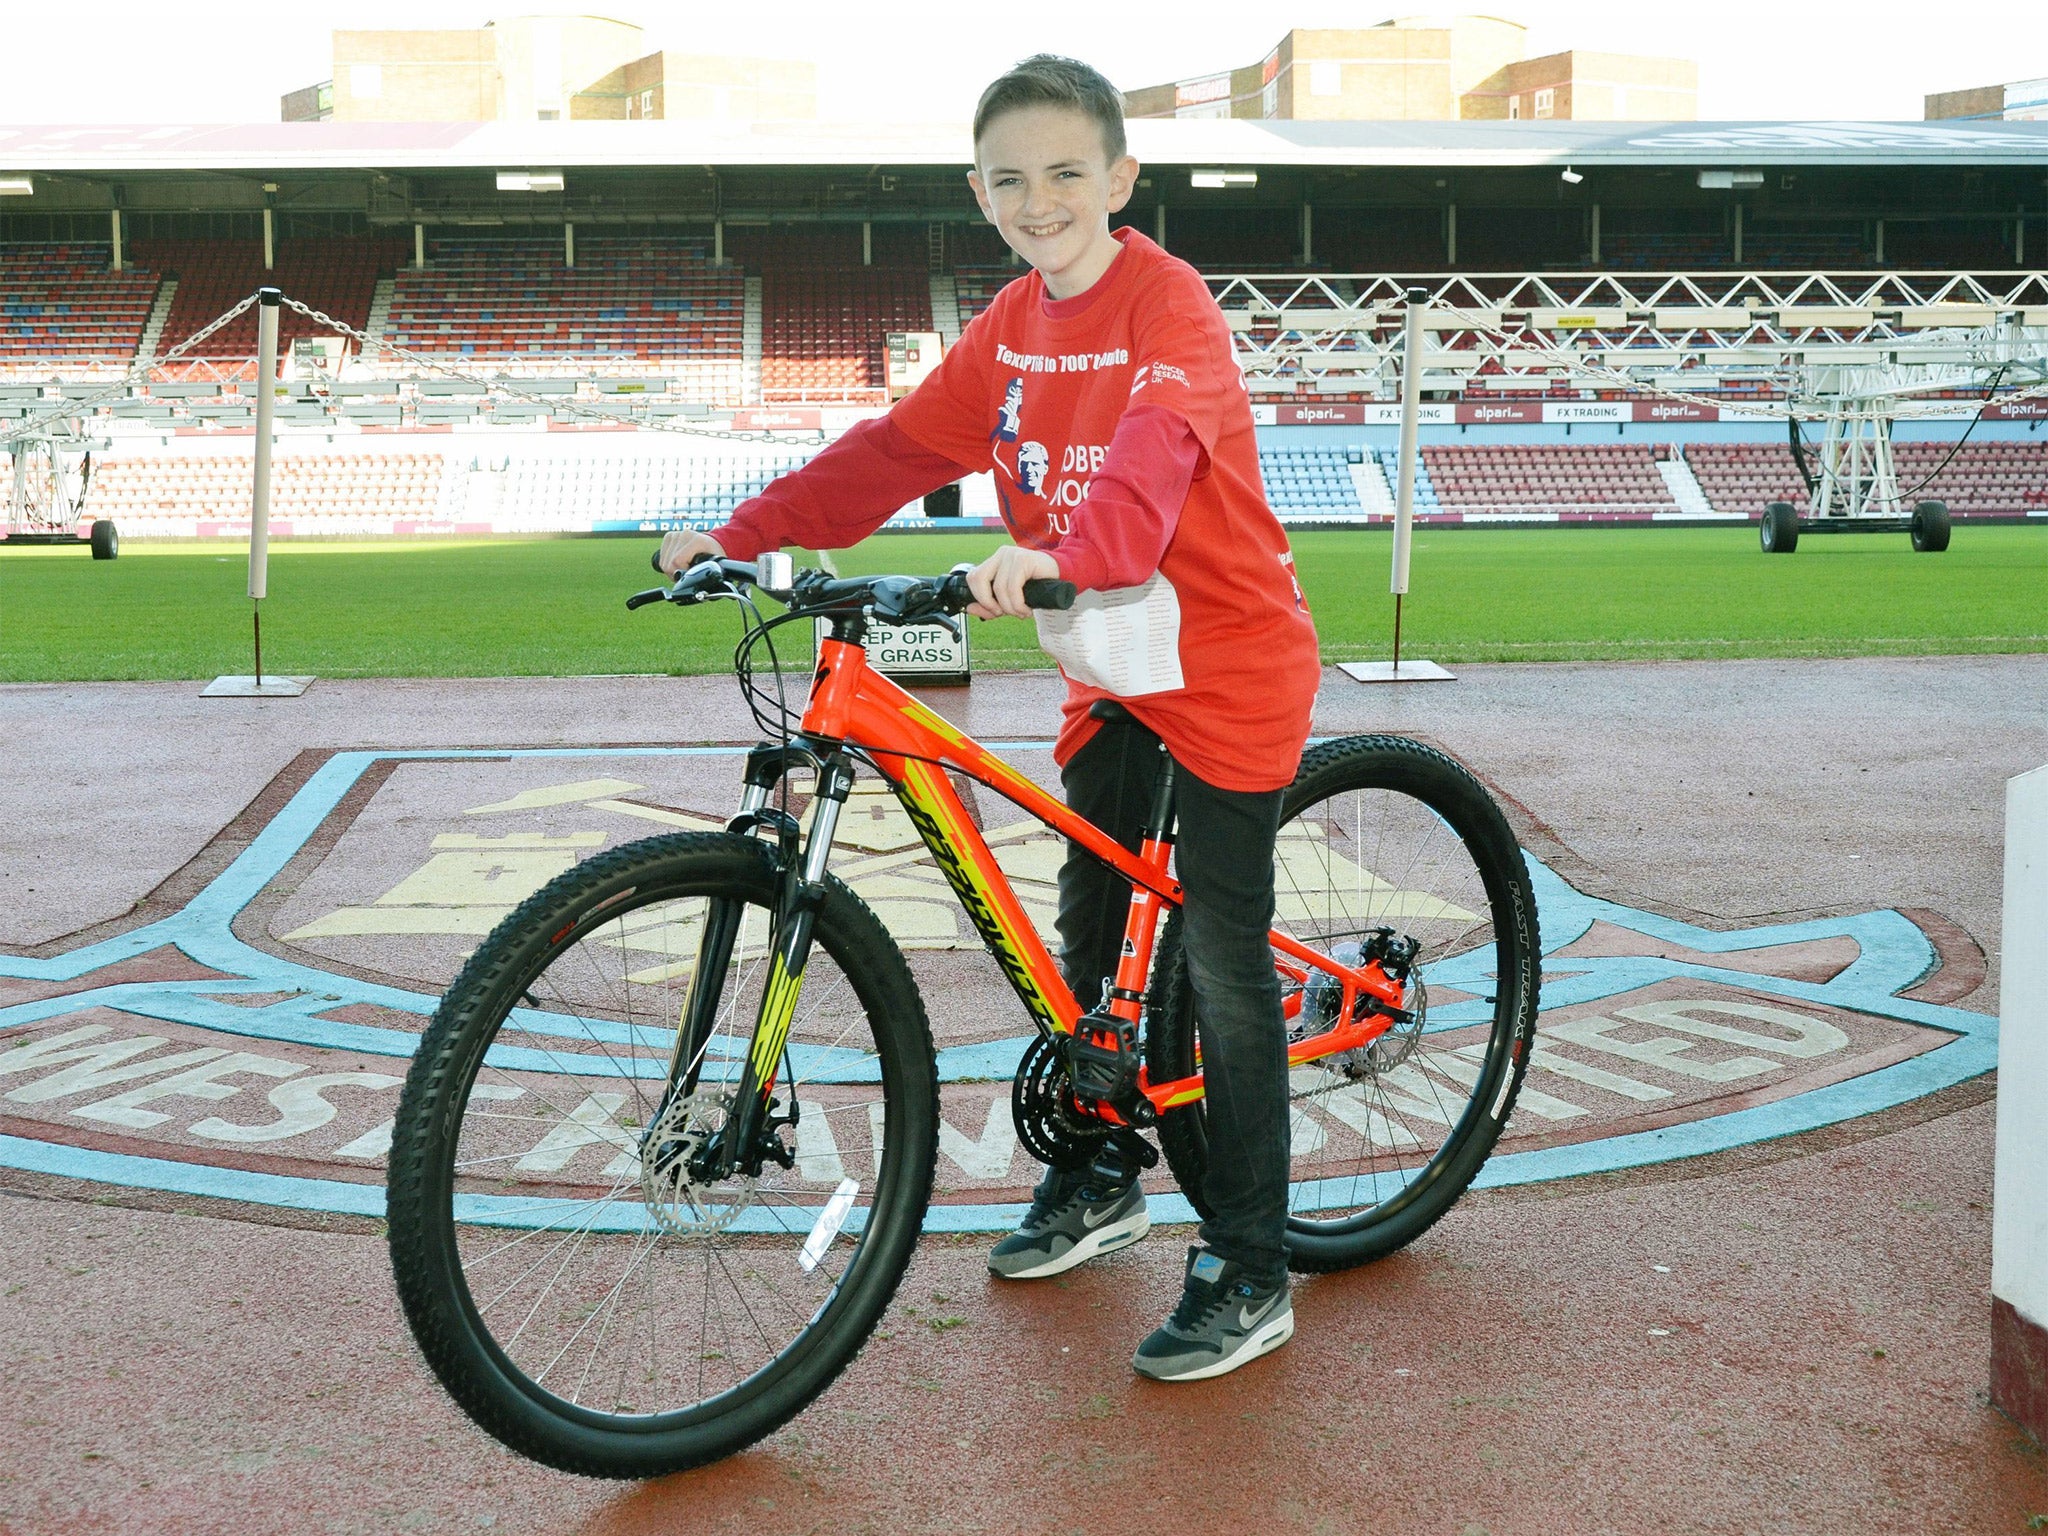 The 13-year-old schoolboy raised over £230,000 for charity